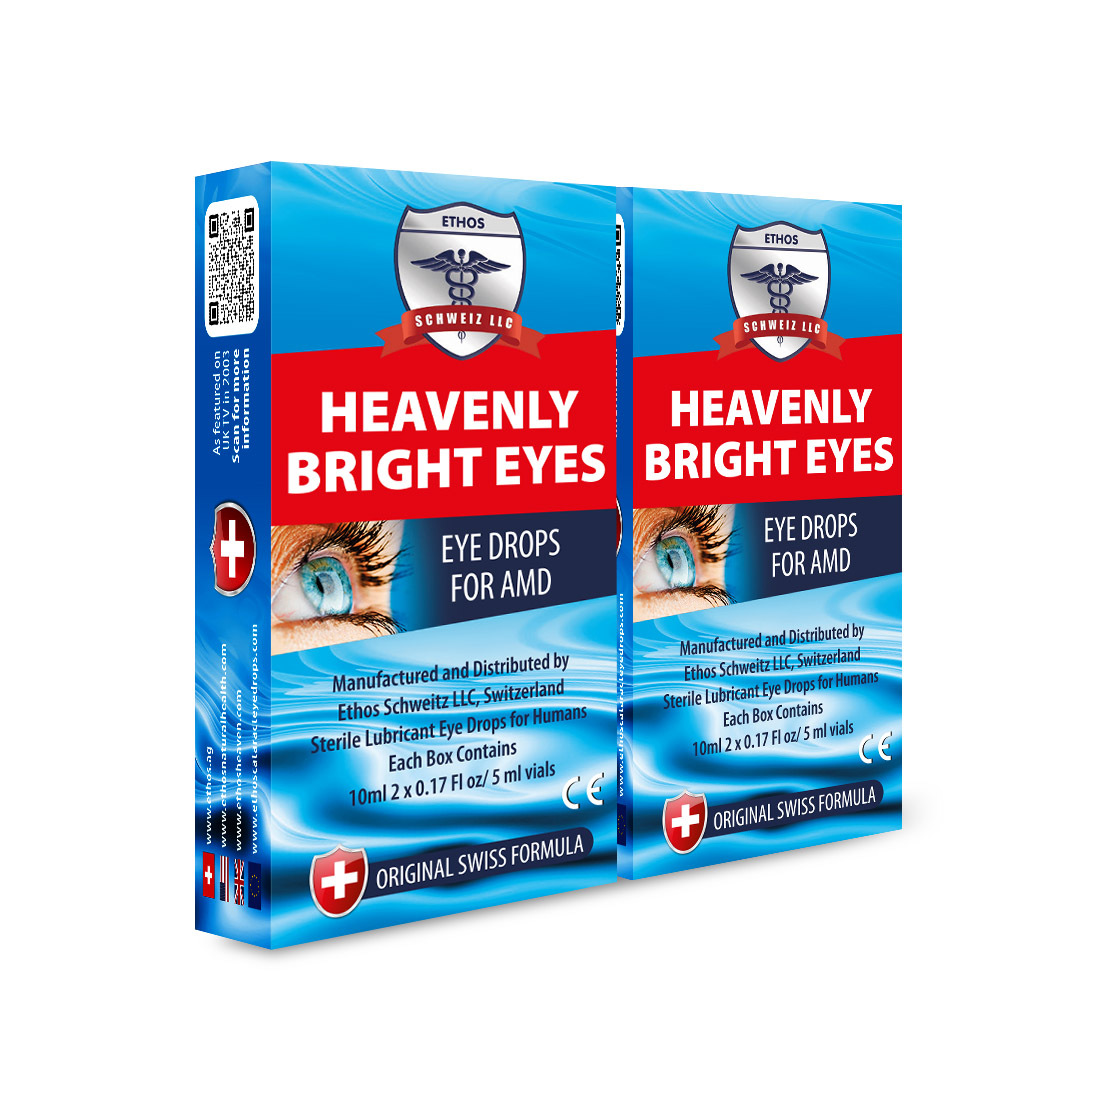 Ethos Heavenly AMD Eye Drops for Age-Related Macular Degeneration 2 x Boxes 20ml - $149.97